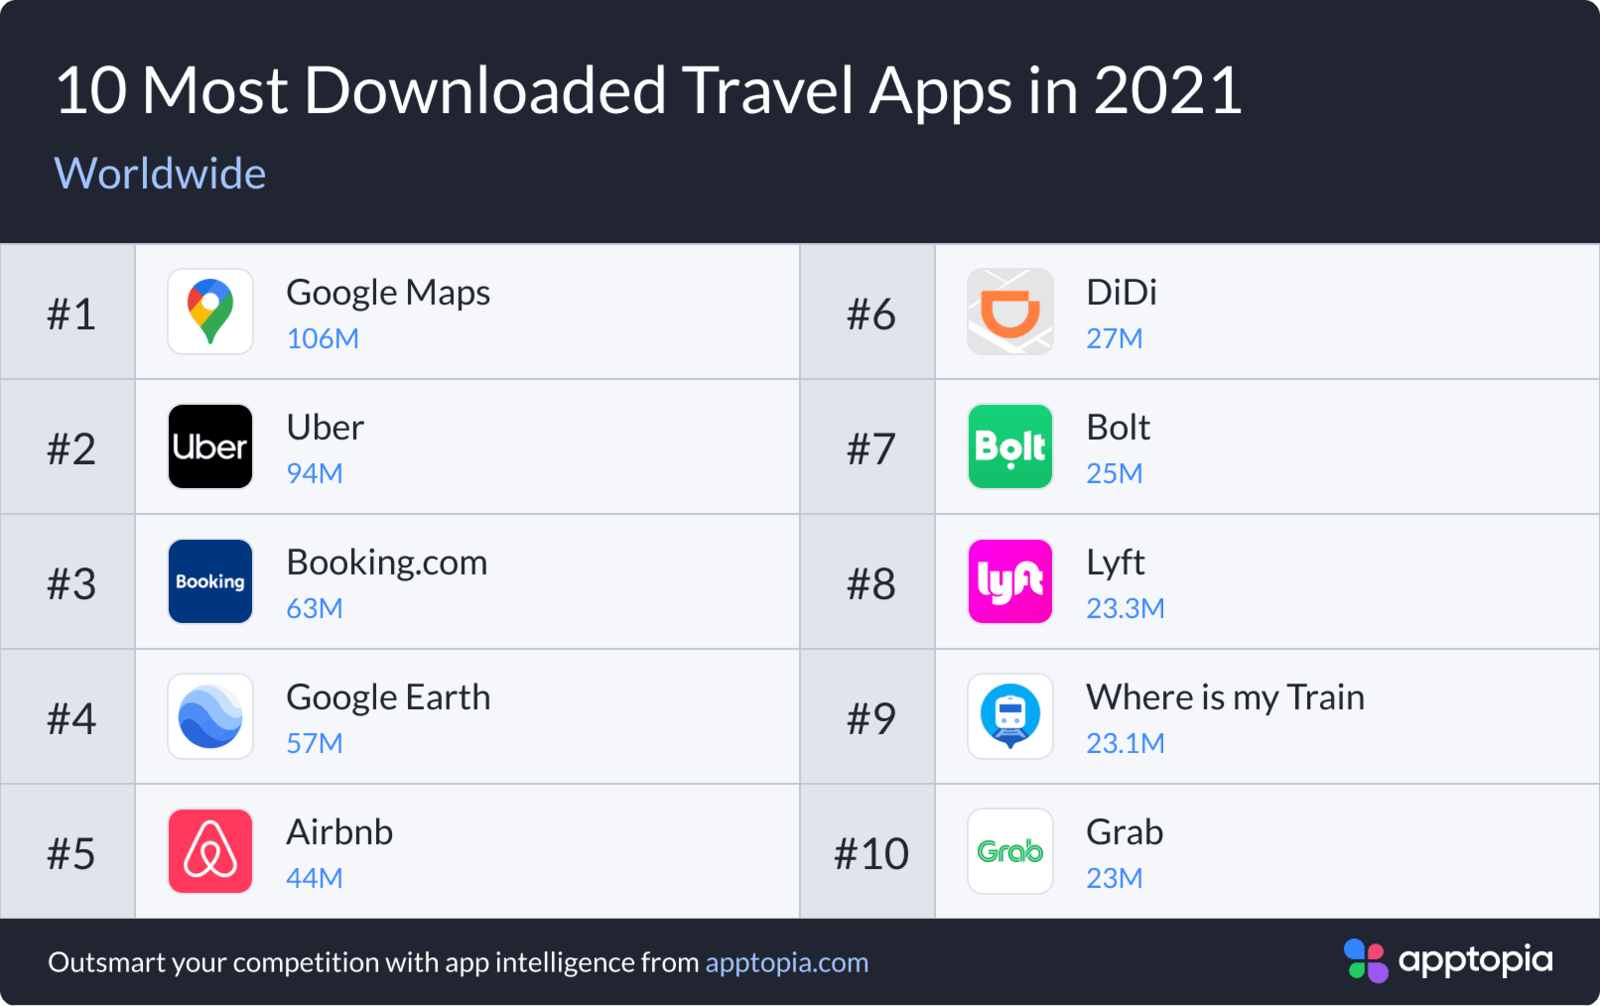 10 Most Downloaded Travel Apps in 2021